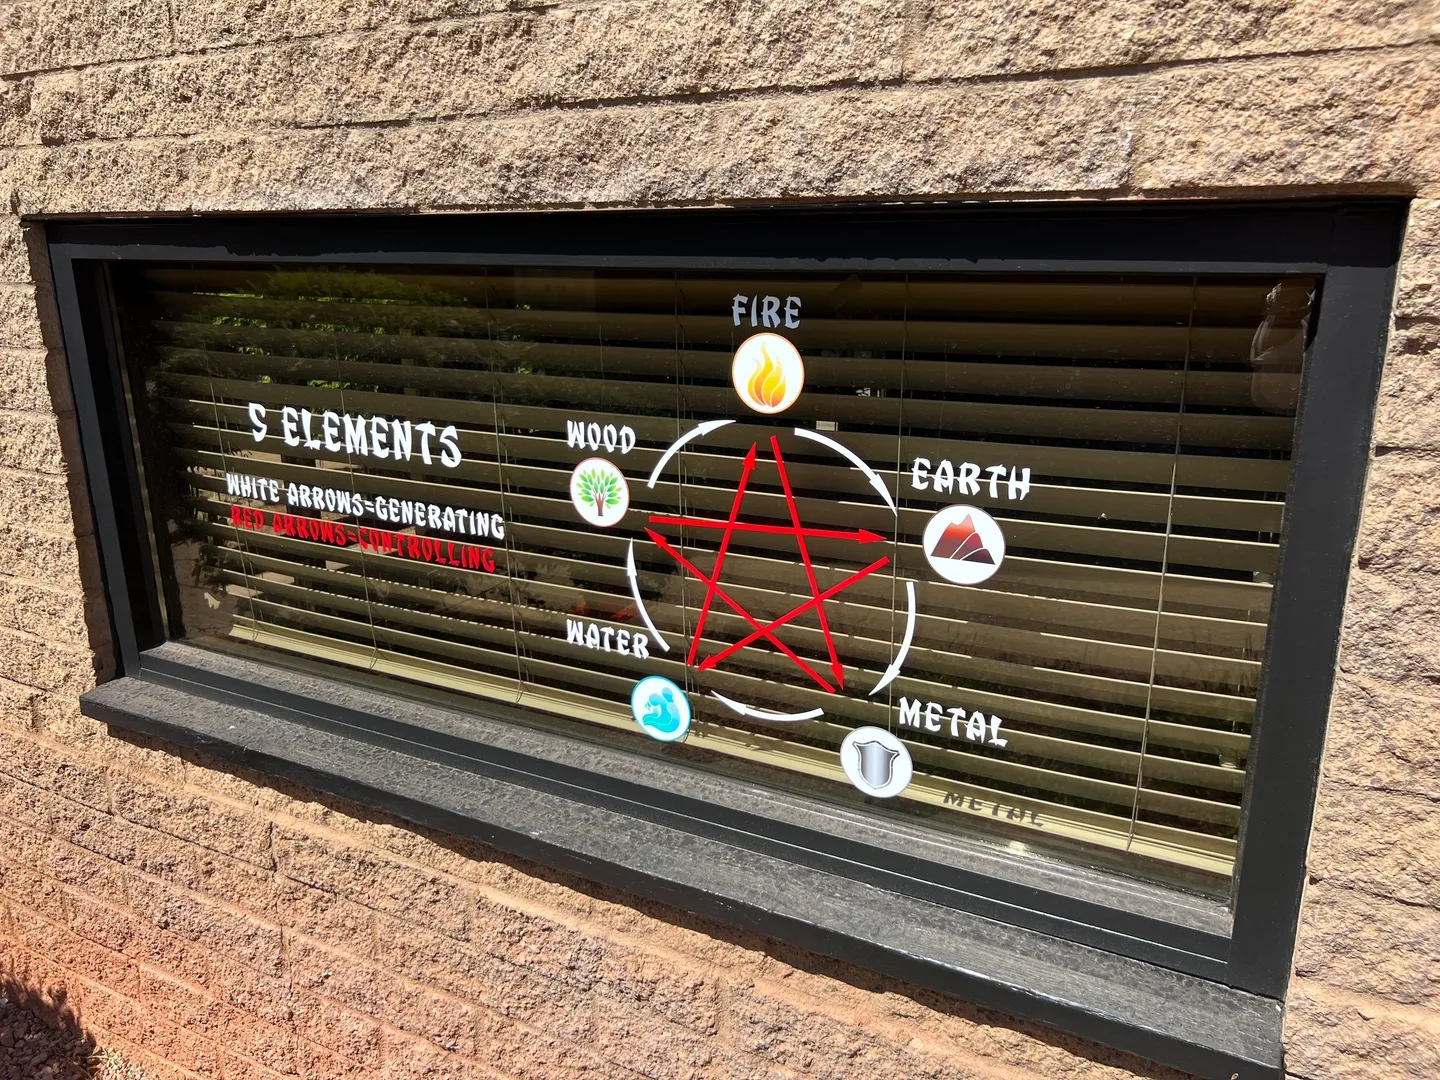 The next window displays the Ancient 5 Element Theory that is a powerful healing method even today.